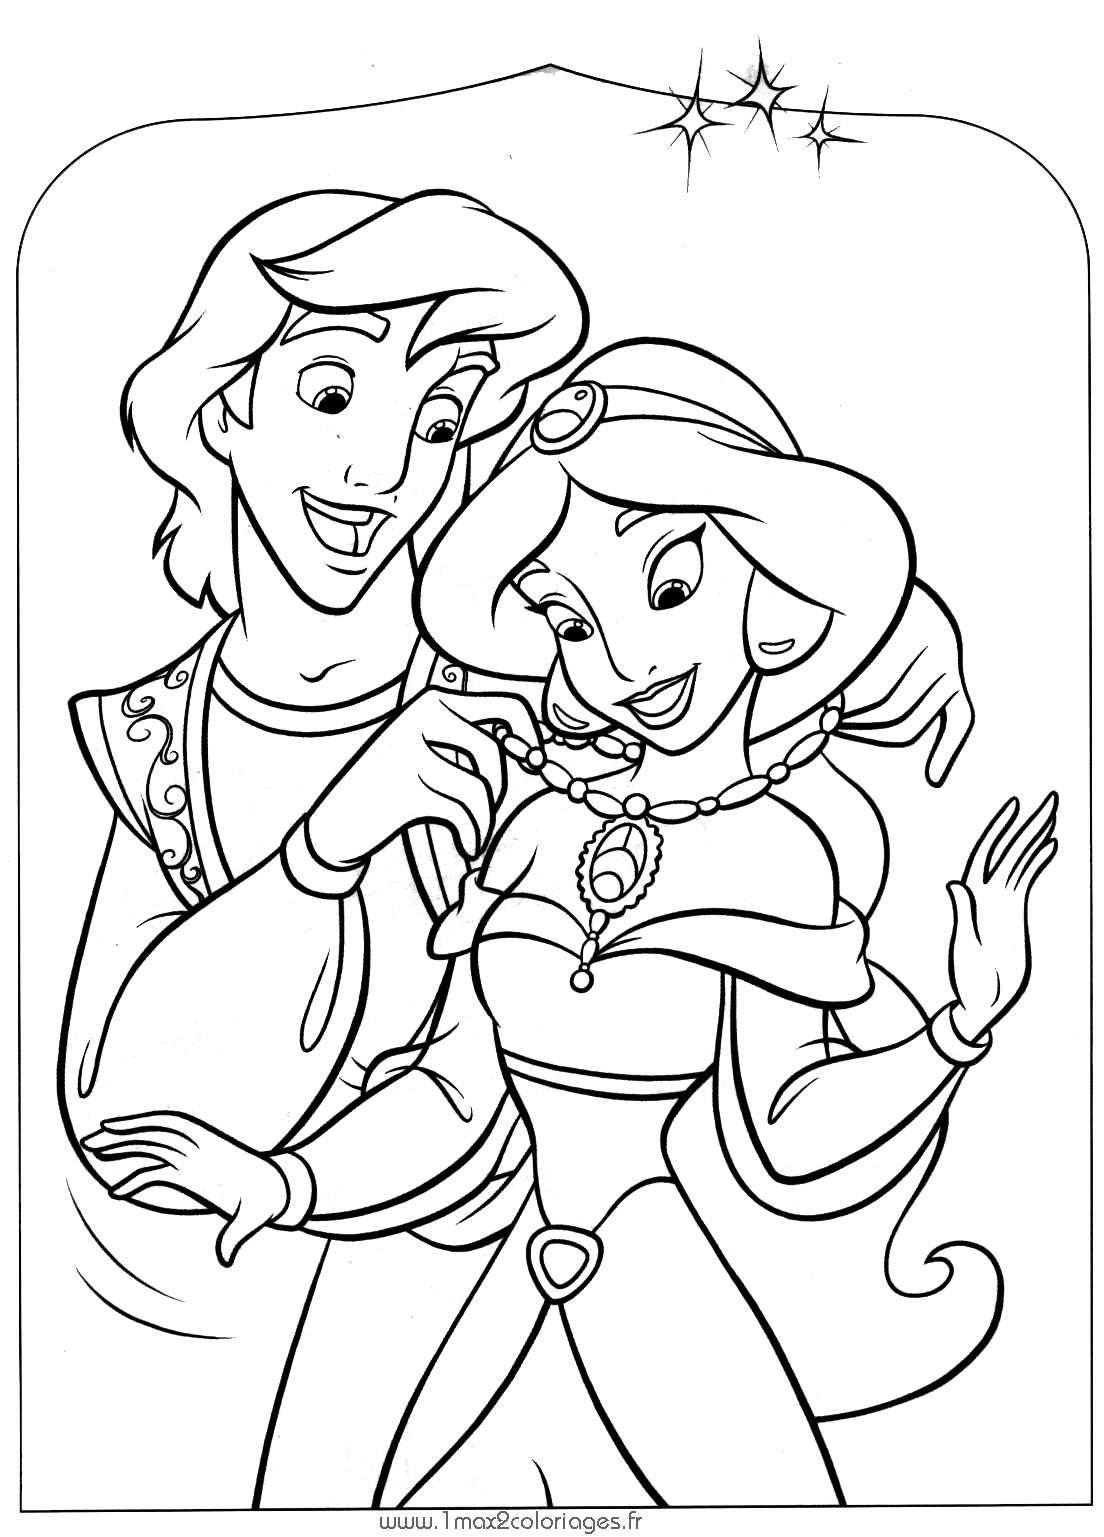 Download Aladdin and jasmine free to color for kids - Aladdin (and ...